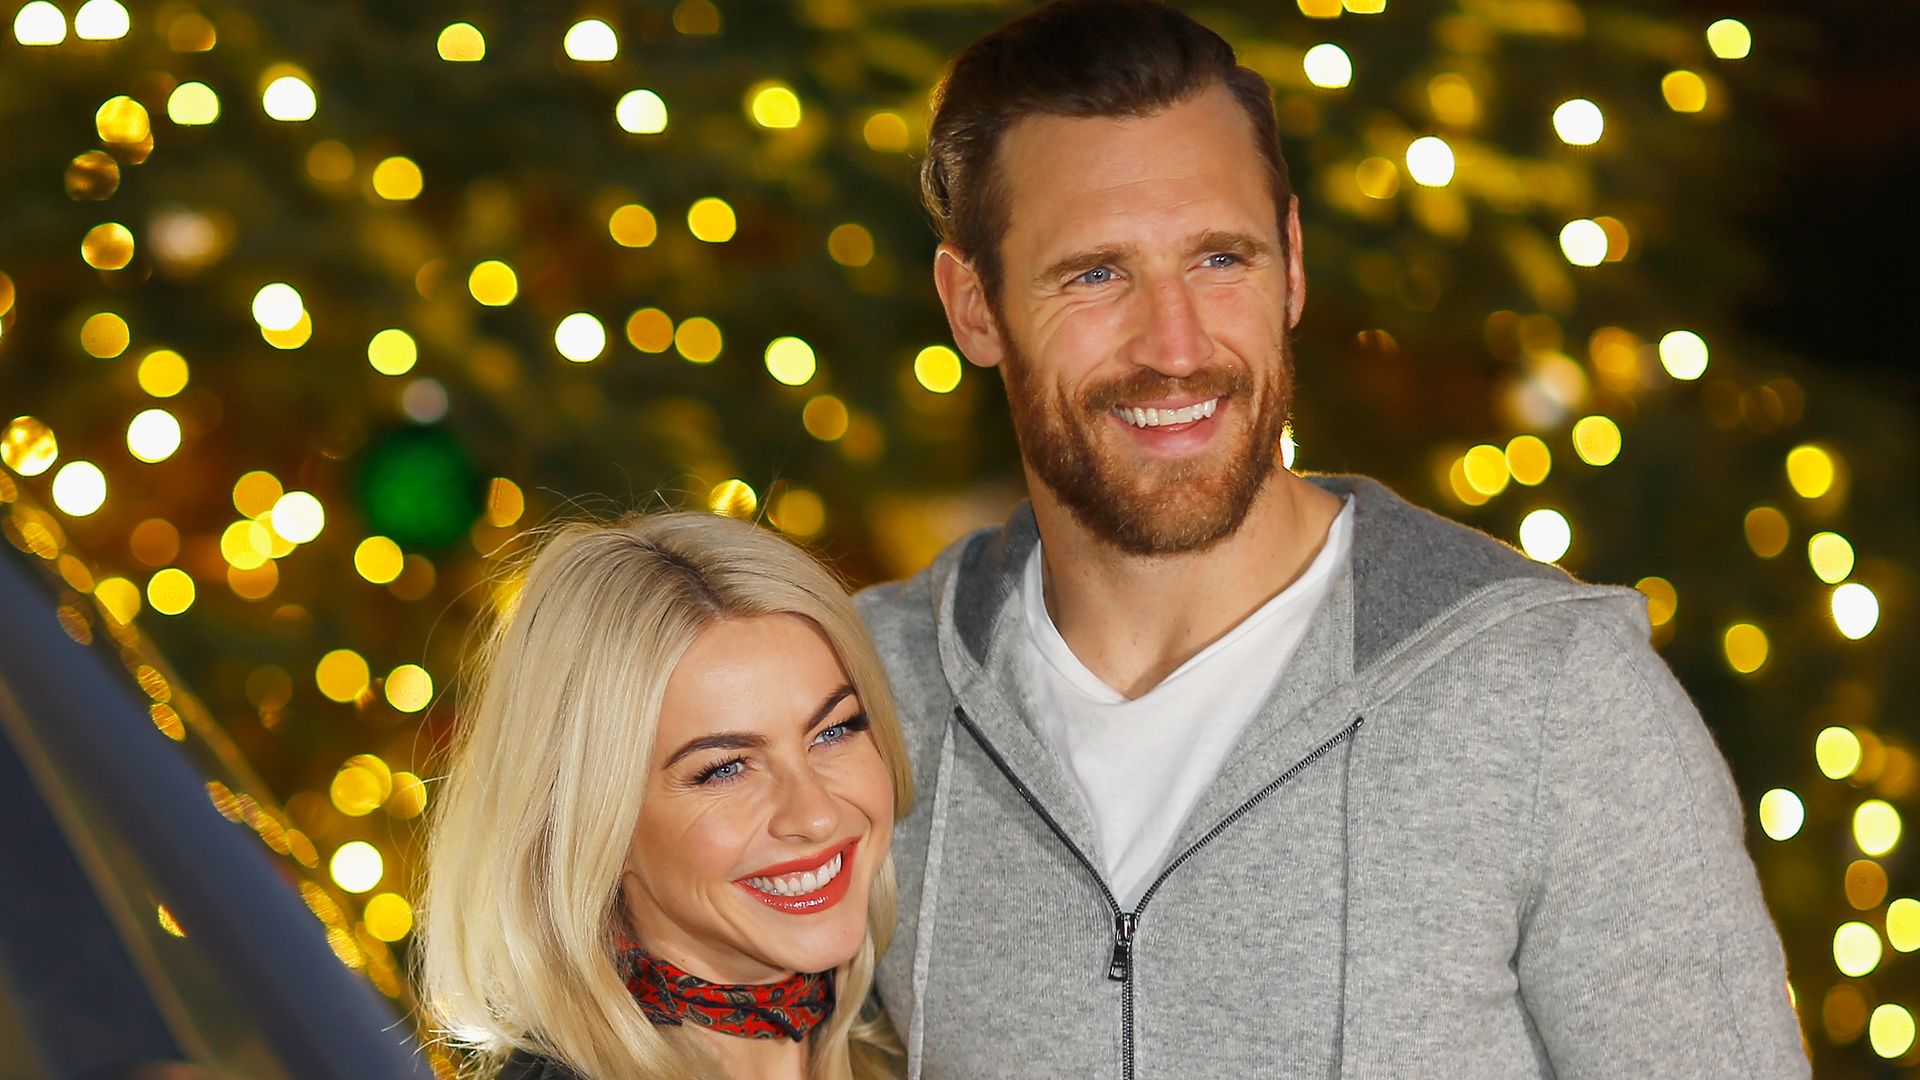 Julianne Hough (L) and Brooks Laich attend the Volkswagen Holiday Drive-In Event at Releigh Studios in Los Angeles, California on December 16, 2017